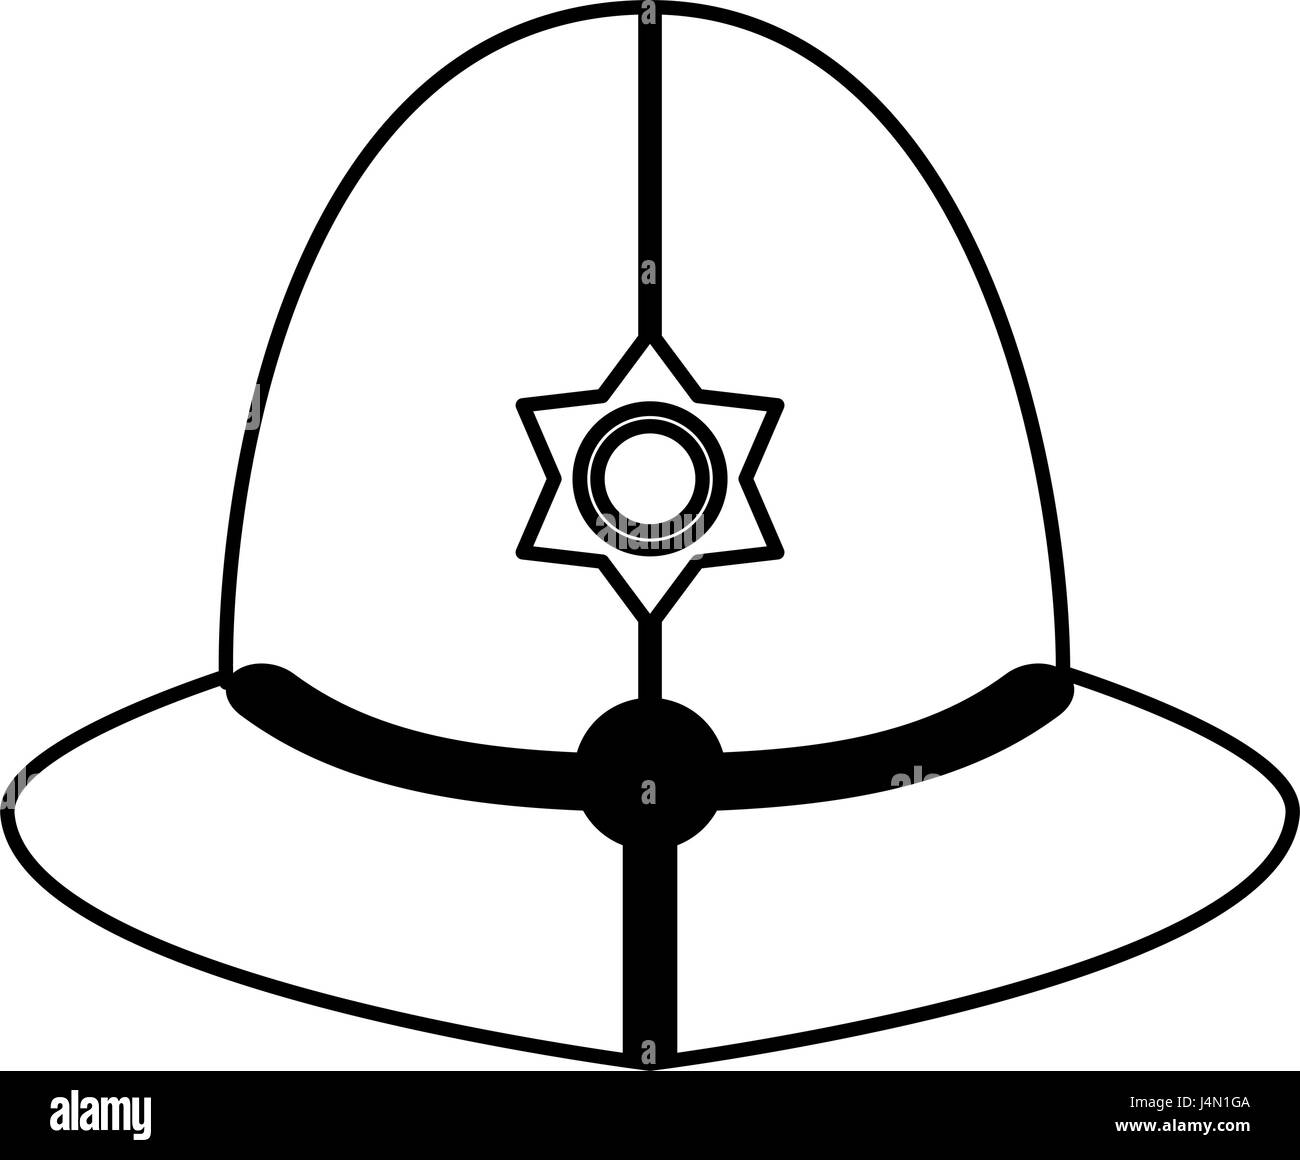 hat of english police officer icon image  Stock Vector